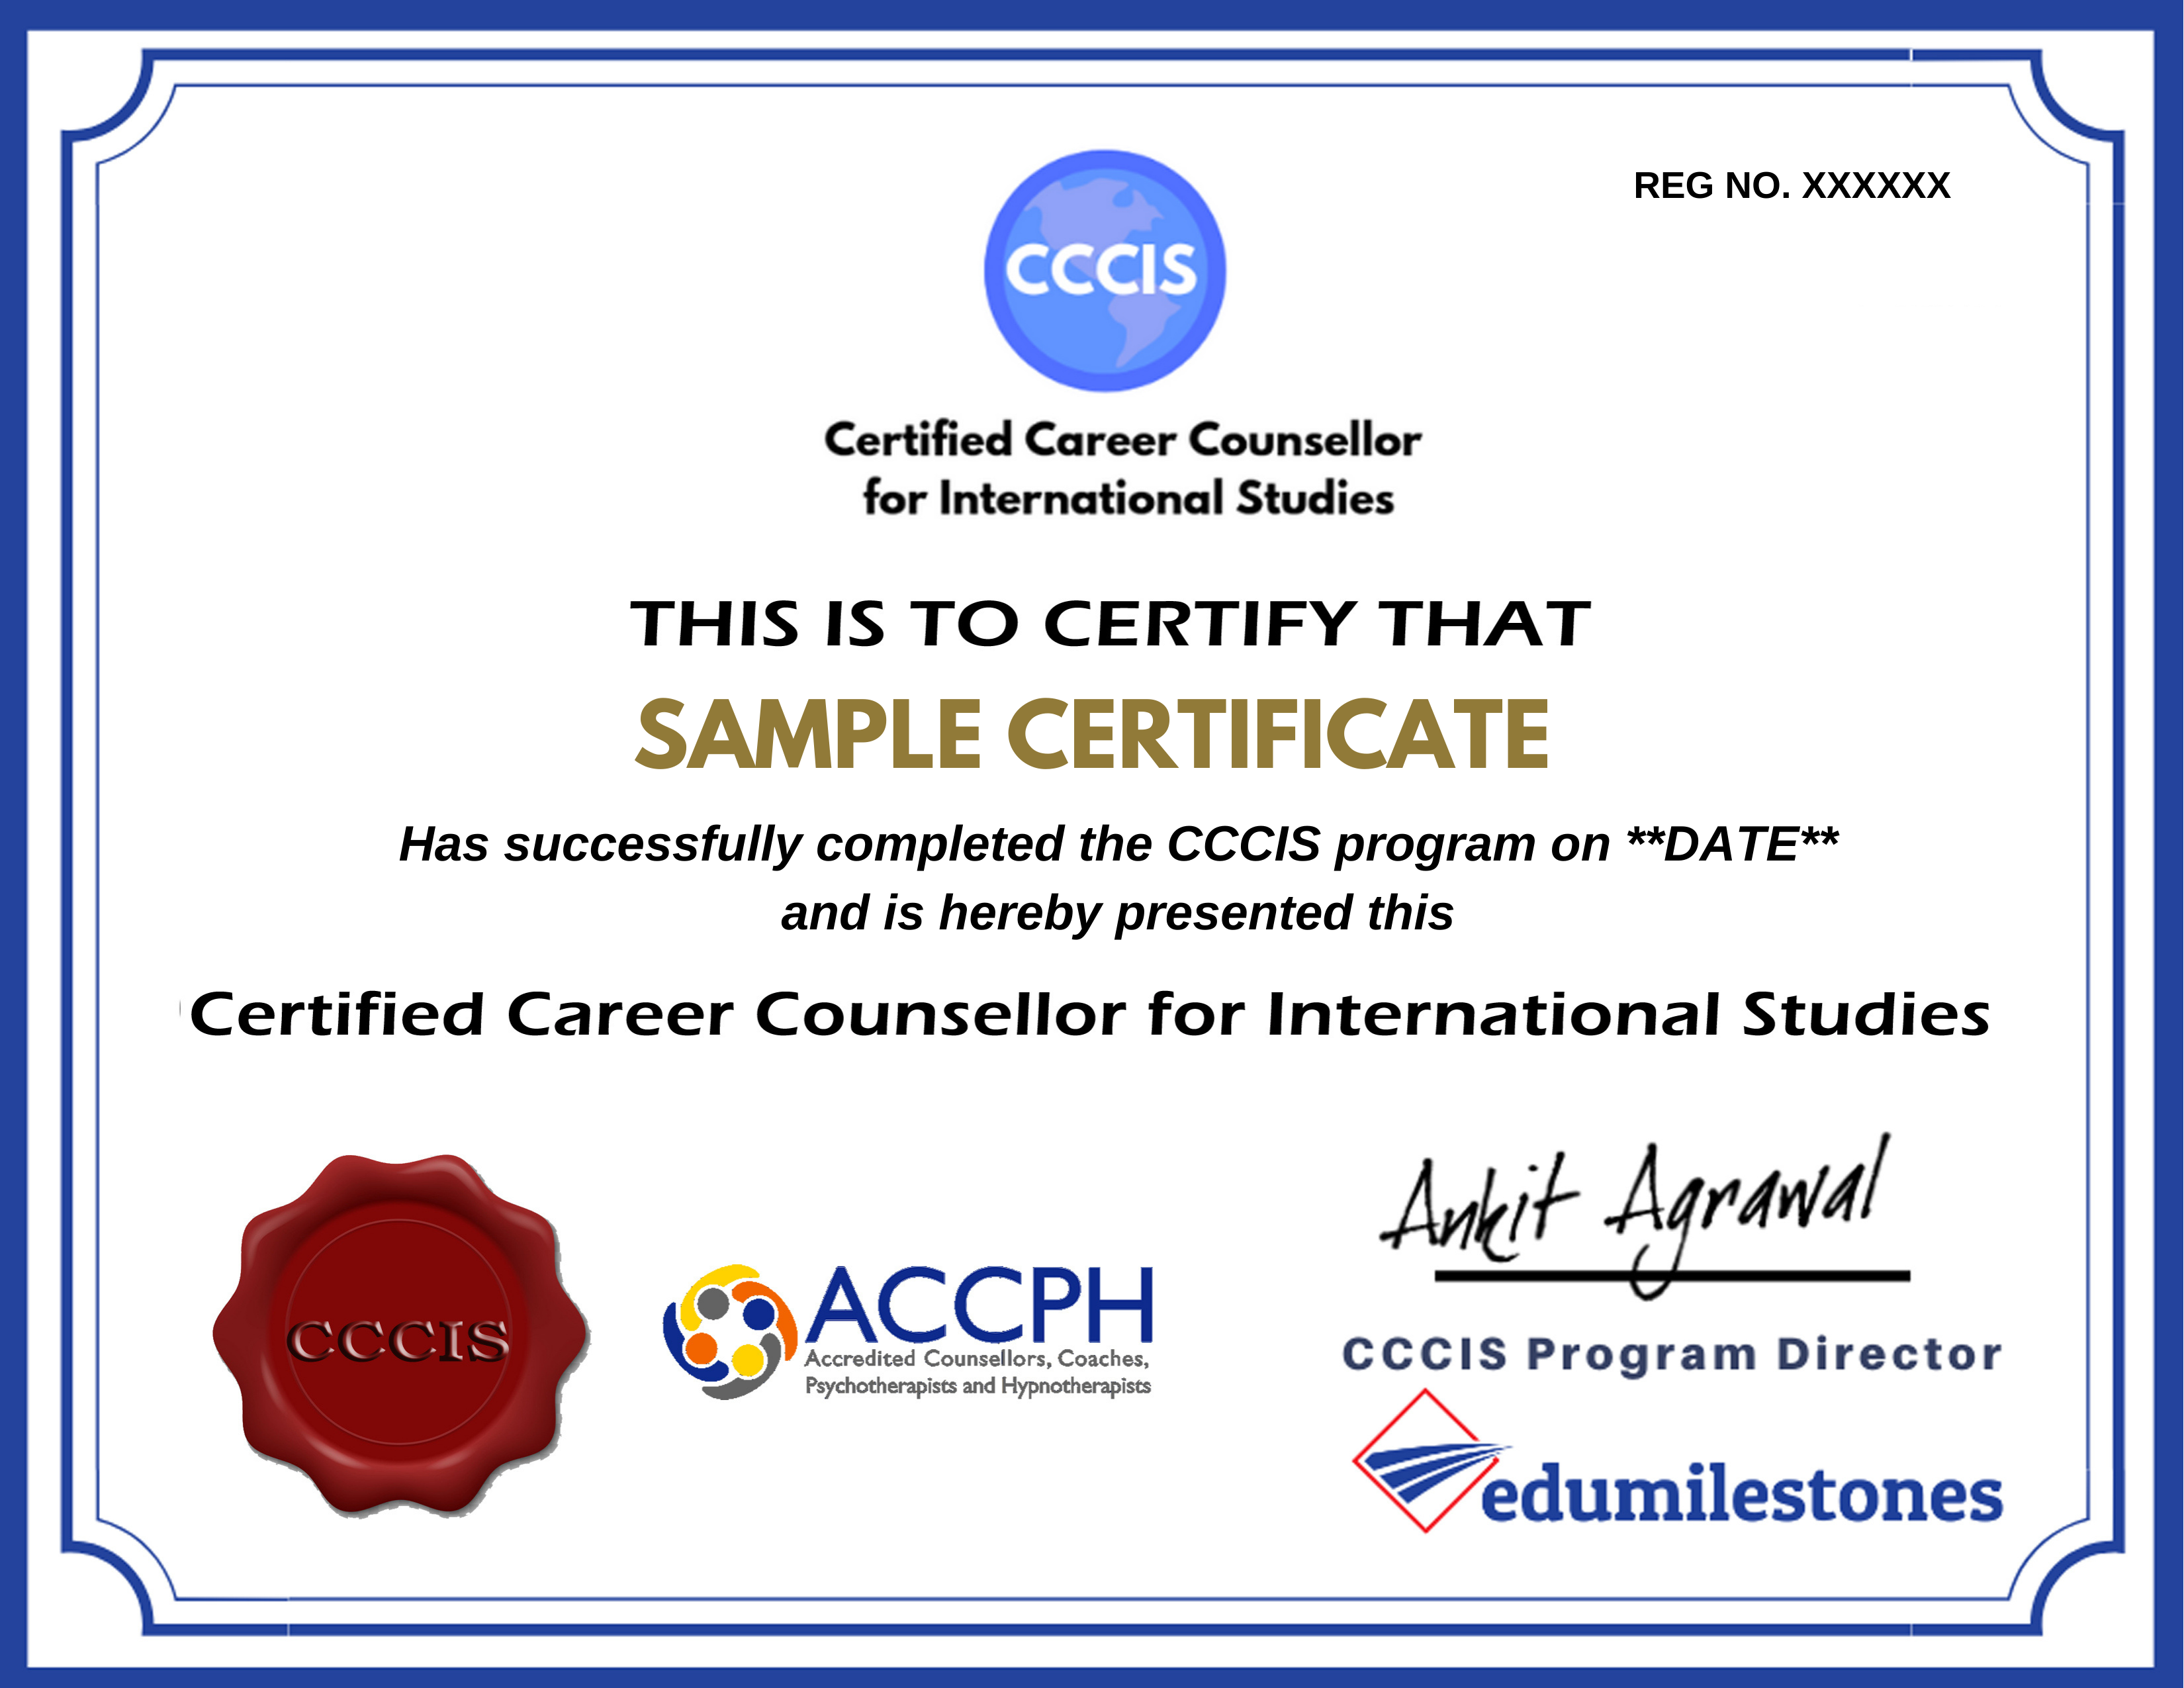 CCCIS Setup your own abroad studies business in 3 weeks